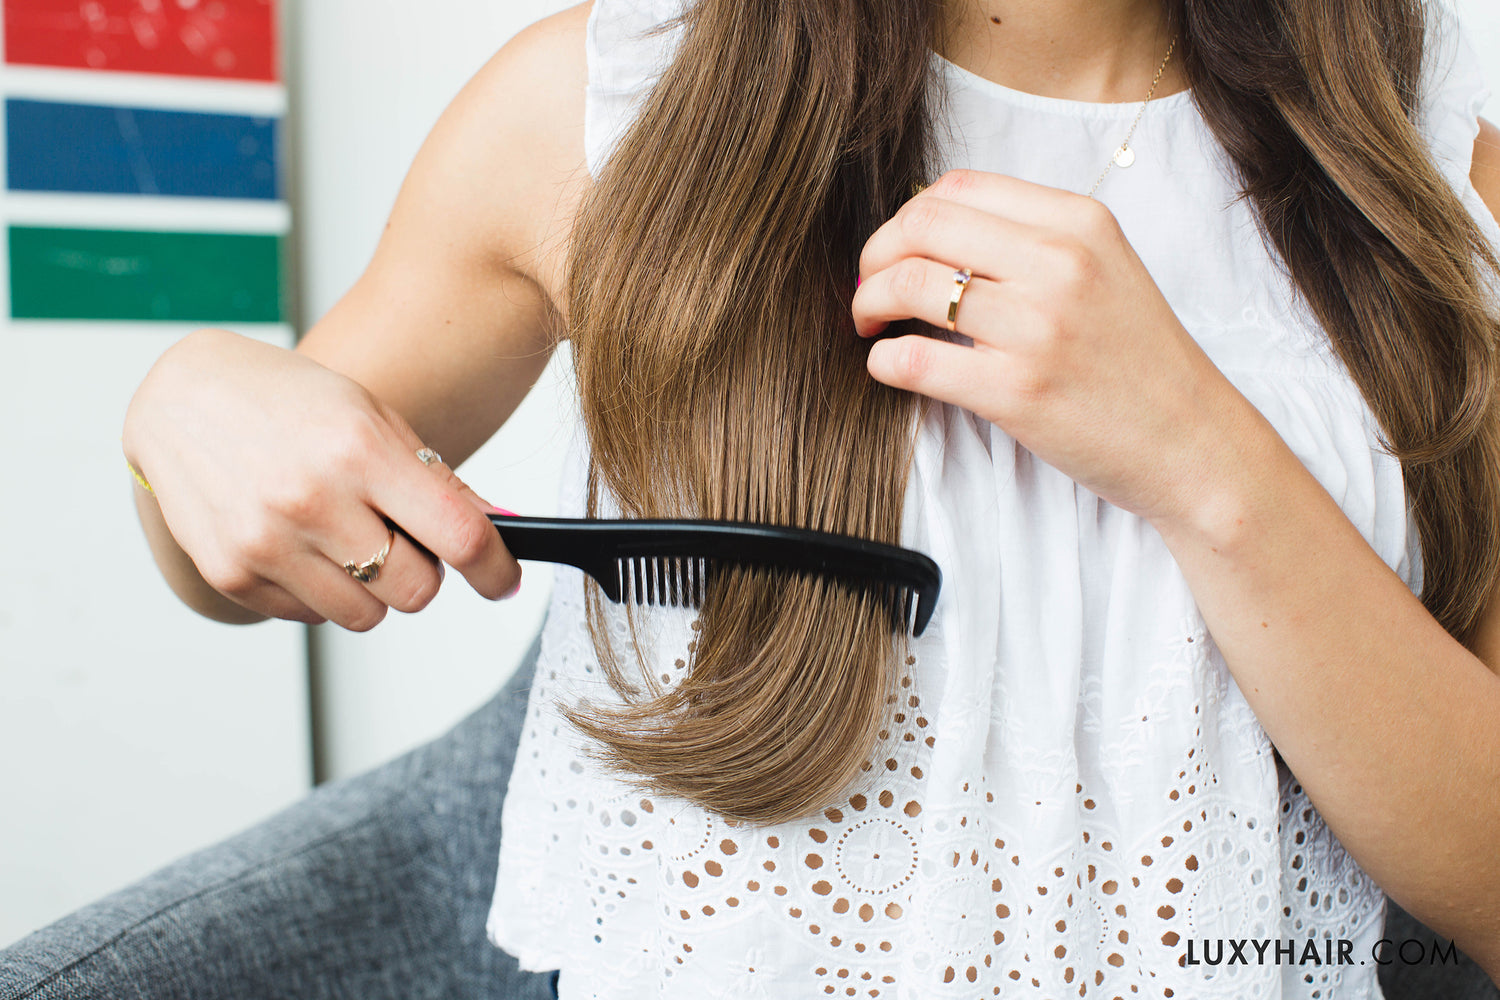 tip: brush from the bottom and work your way up!